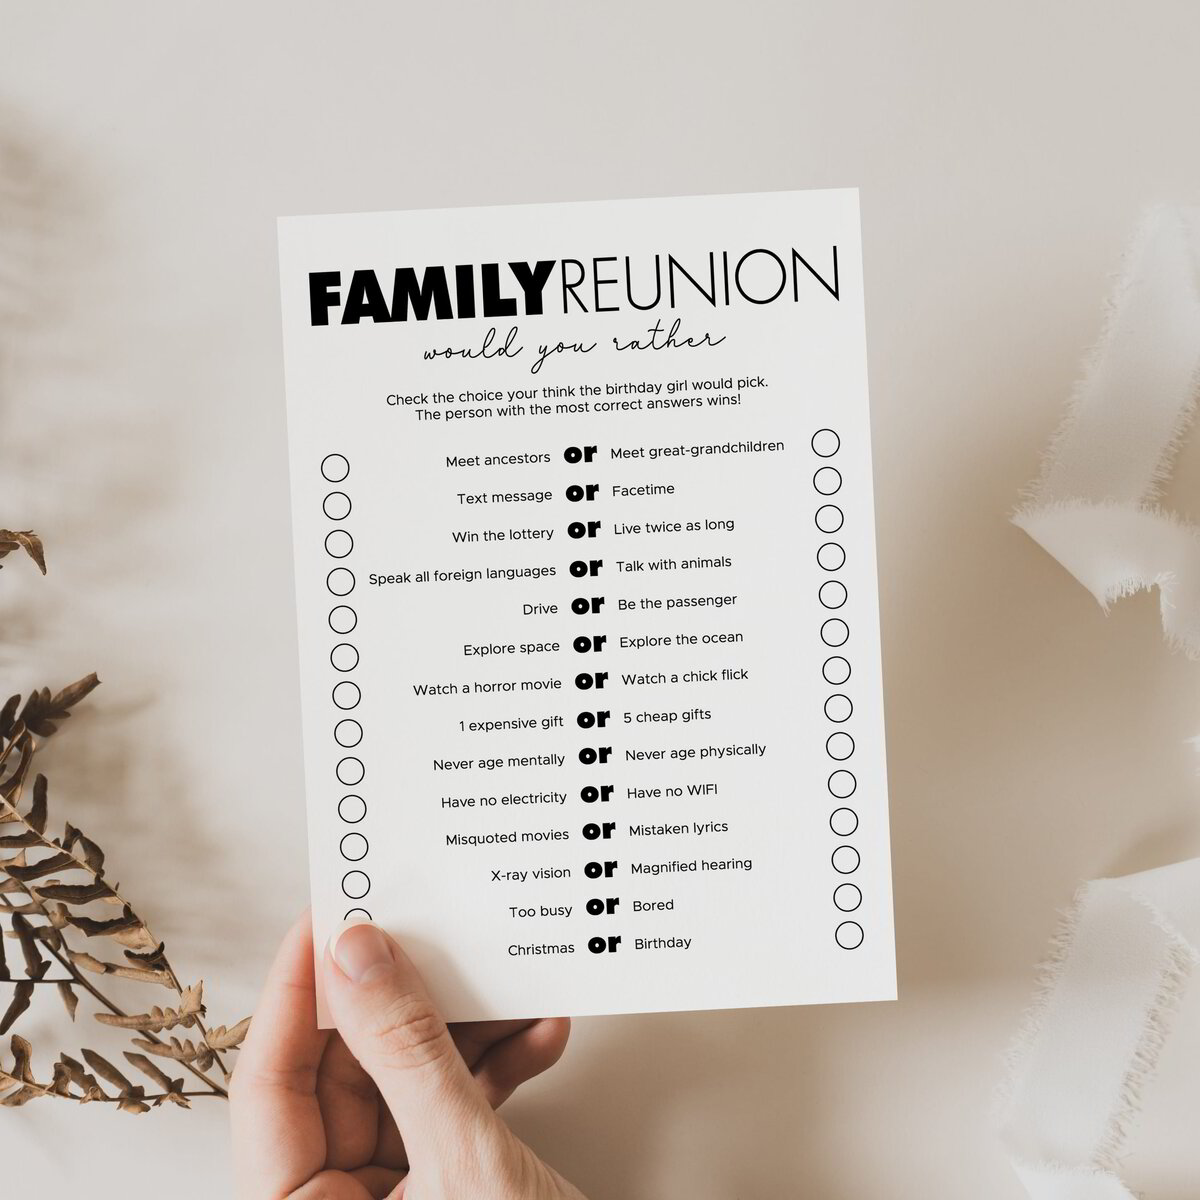 Fun Would You Rather Questions Sheet for Families | Printable